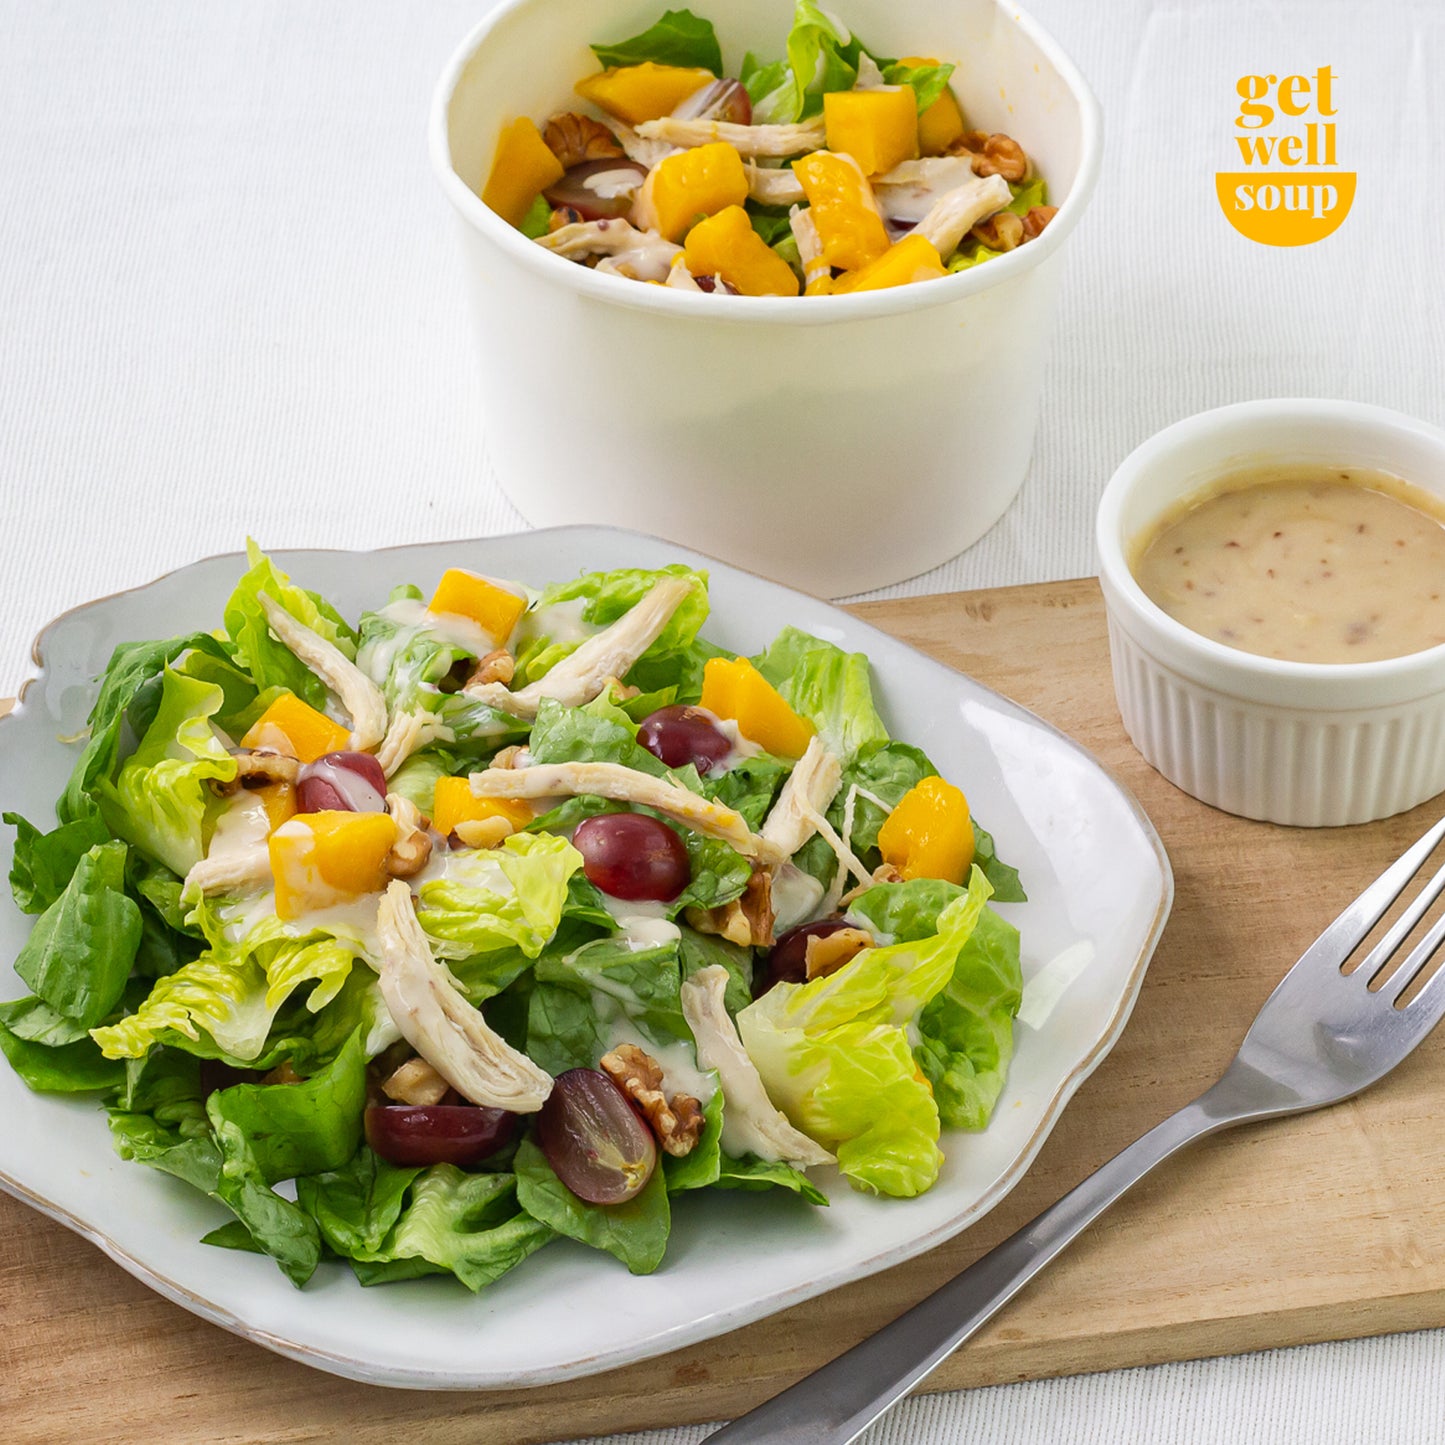 sicilian chicken salad | sicilian salad | chicken salad | salad in manila | salad delivery ph | salad near me | get well soup